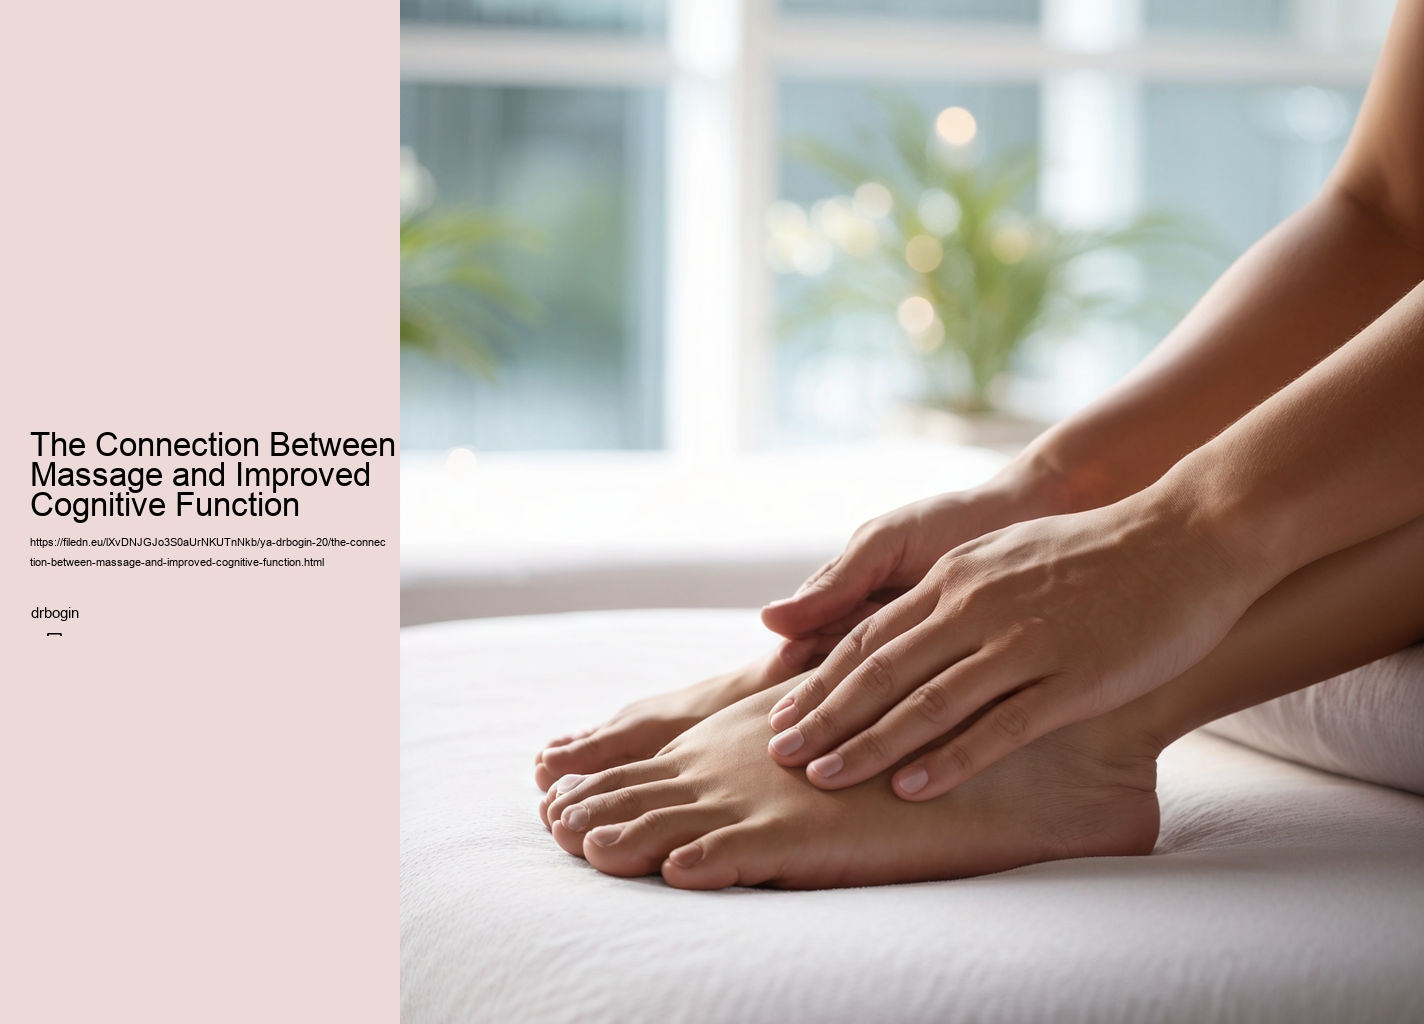 The Connection Between Massage and Improved Cognitive Function